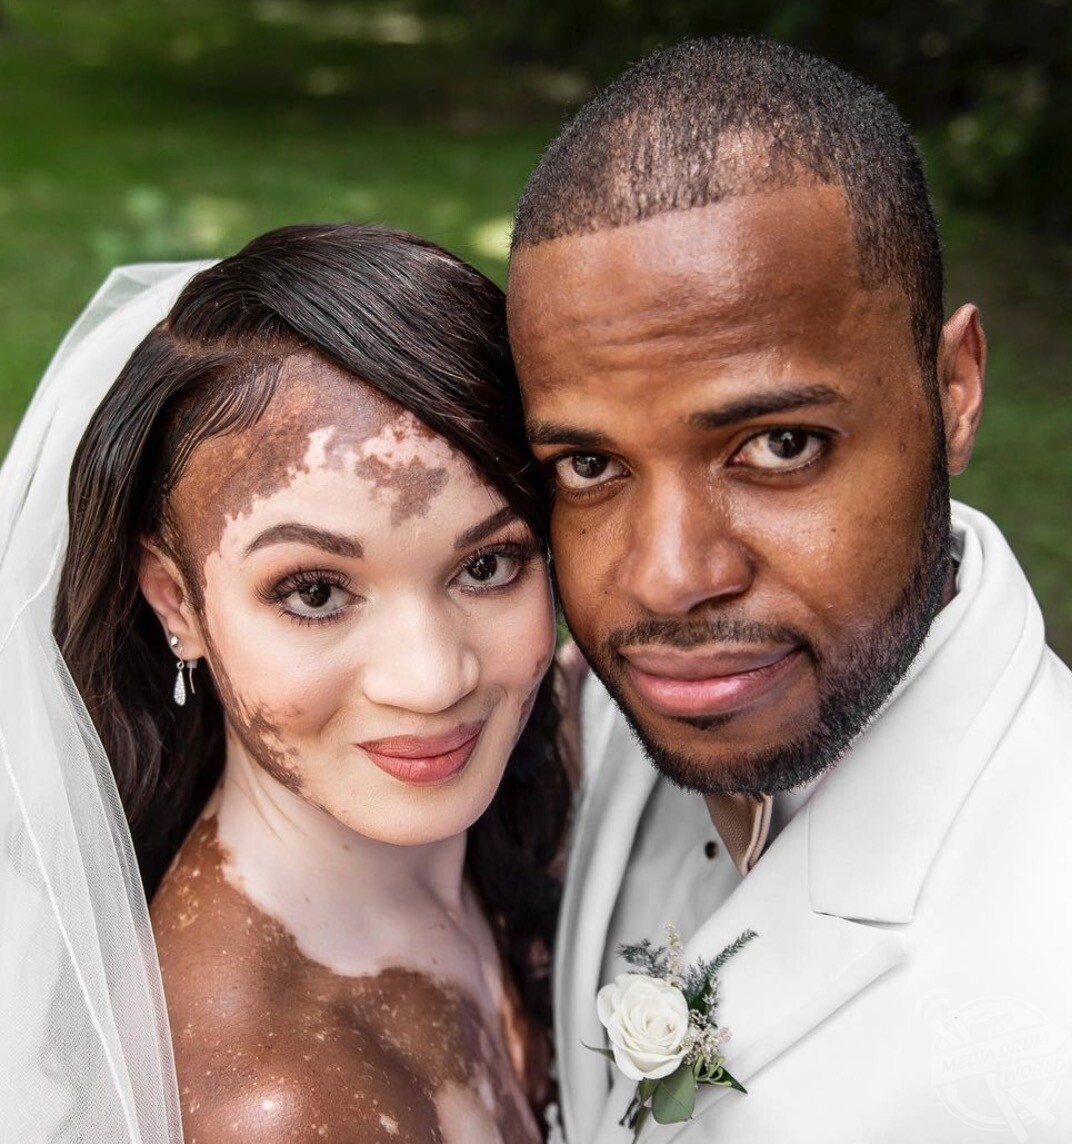 This Woman Thought Her Love Life Was Doomed Because Of Her Skin Condition Media Drum World 3980